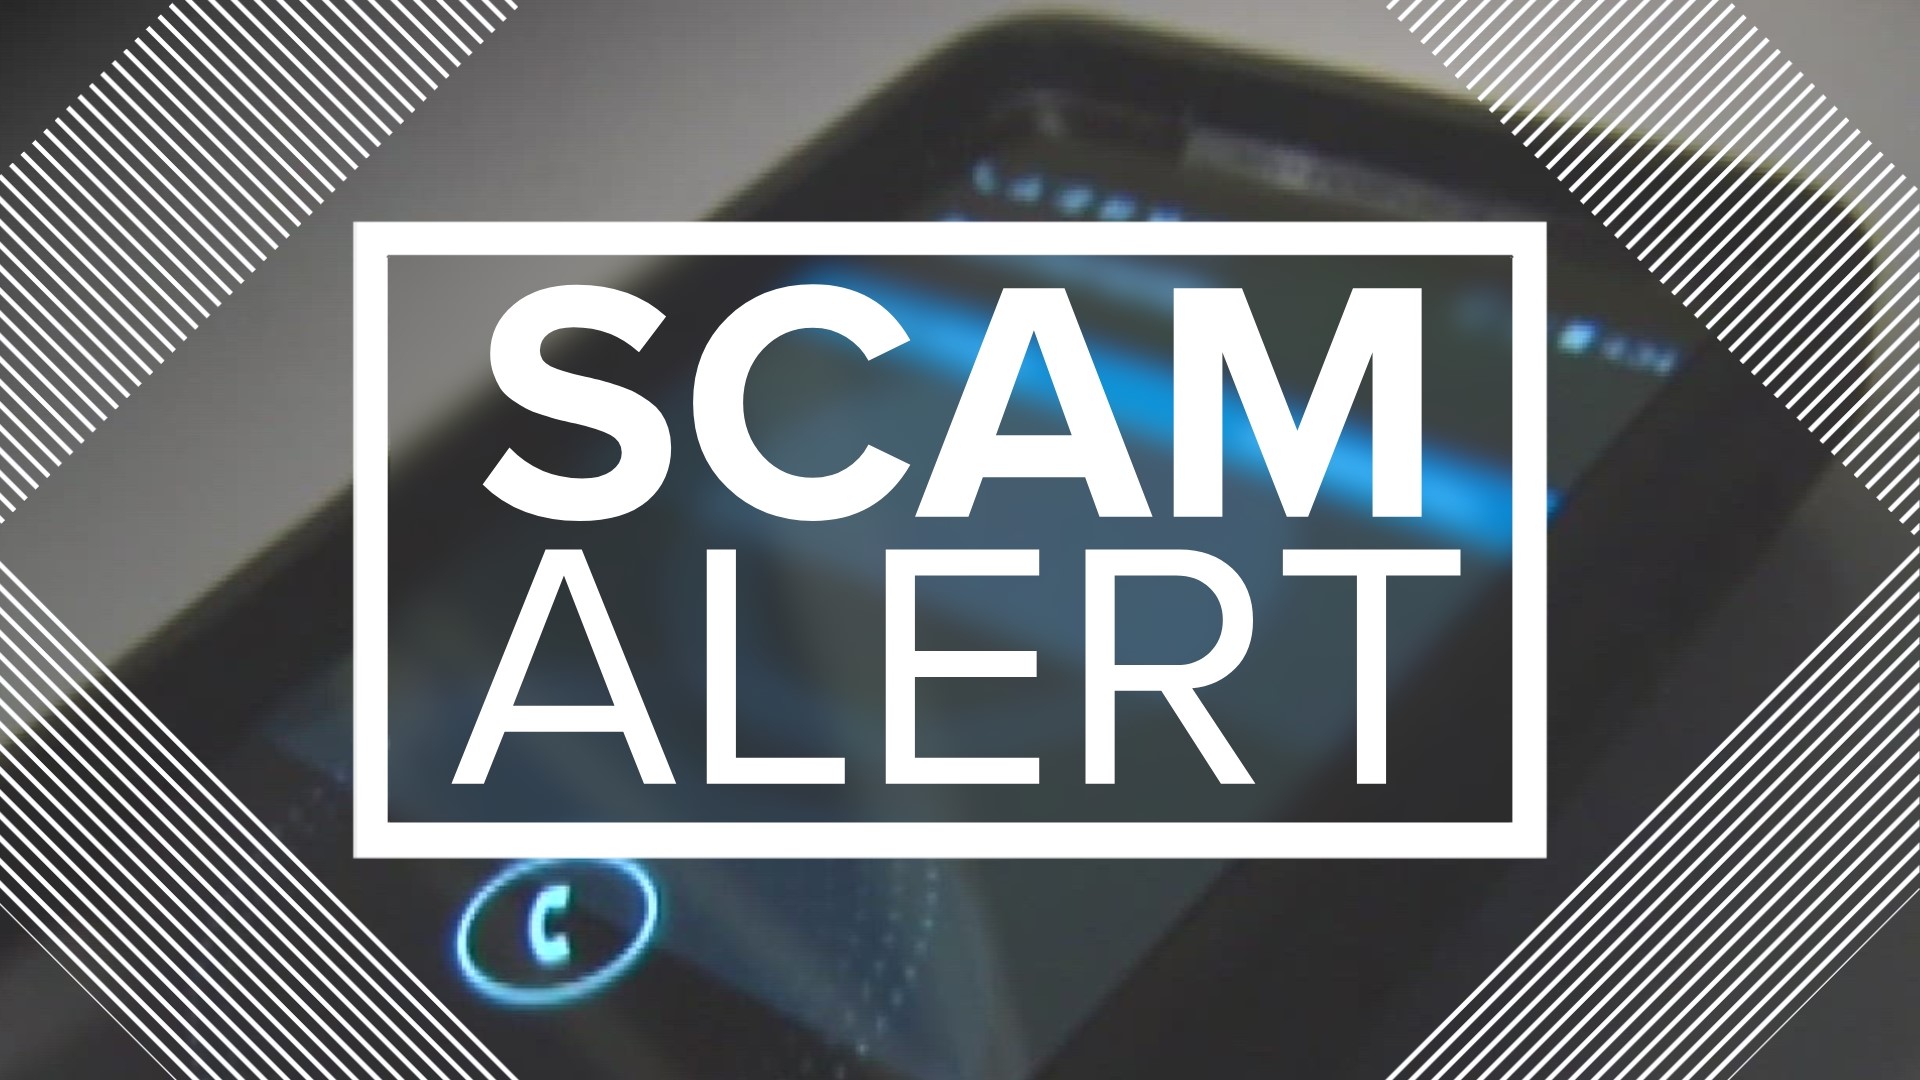 TPD said scammers are sending texts or emails claiming to be from the Violations and Fines Office, demanding money for outstanding fees and fines.